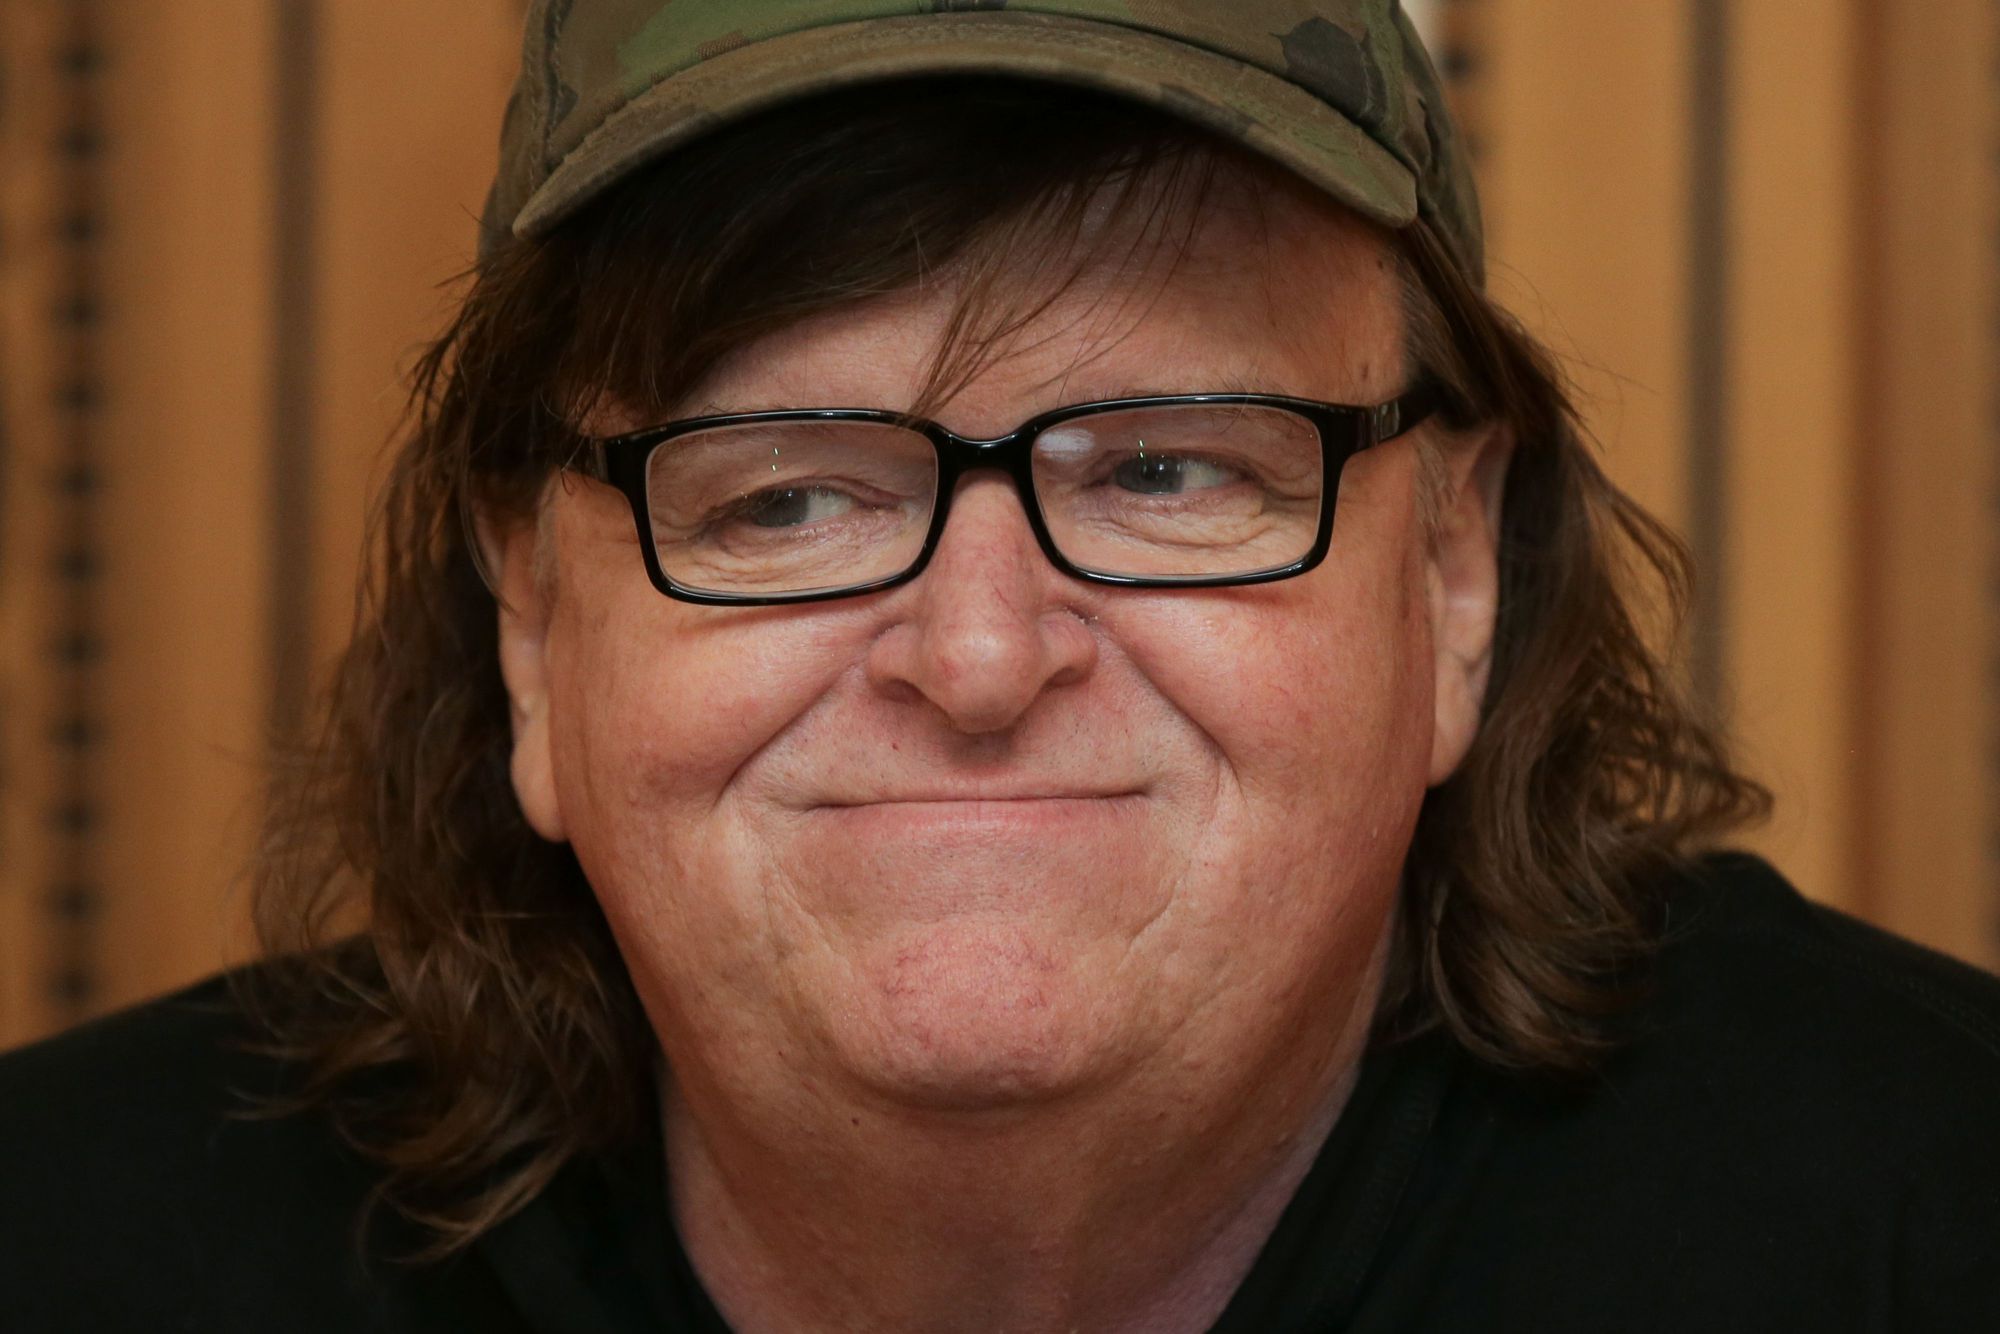 (FILES) This file photo taken on June 9, 2016 shows US filmmaker Michael Moore attending a photo call for his new film "Where To Invade Next" in London. In 2004, director Michael Moore took on George W. Bush in "Fahrenheit 9/11." On Tuesday, the filmmaker surprised his fans with news that he would debut his new film about Donald Trump. "Michael Moore in TrumpLand" will have a free pre-screening October 18, 2016 in New York, he announced on Twitter. The movie is apparently based on his failed efforts to stage a one-man show about Trump in an Ohio theater. Moore said it was cancelled because he was told he was too controversial. / AFP PHOTO / DANIEL LEAL-OLIVAS